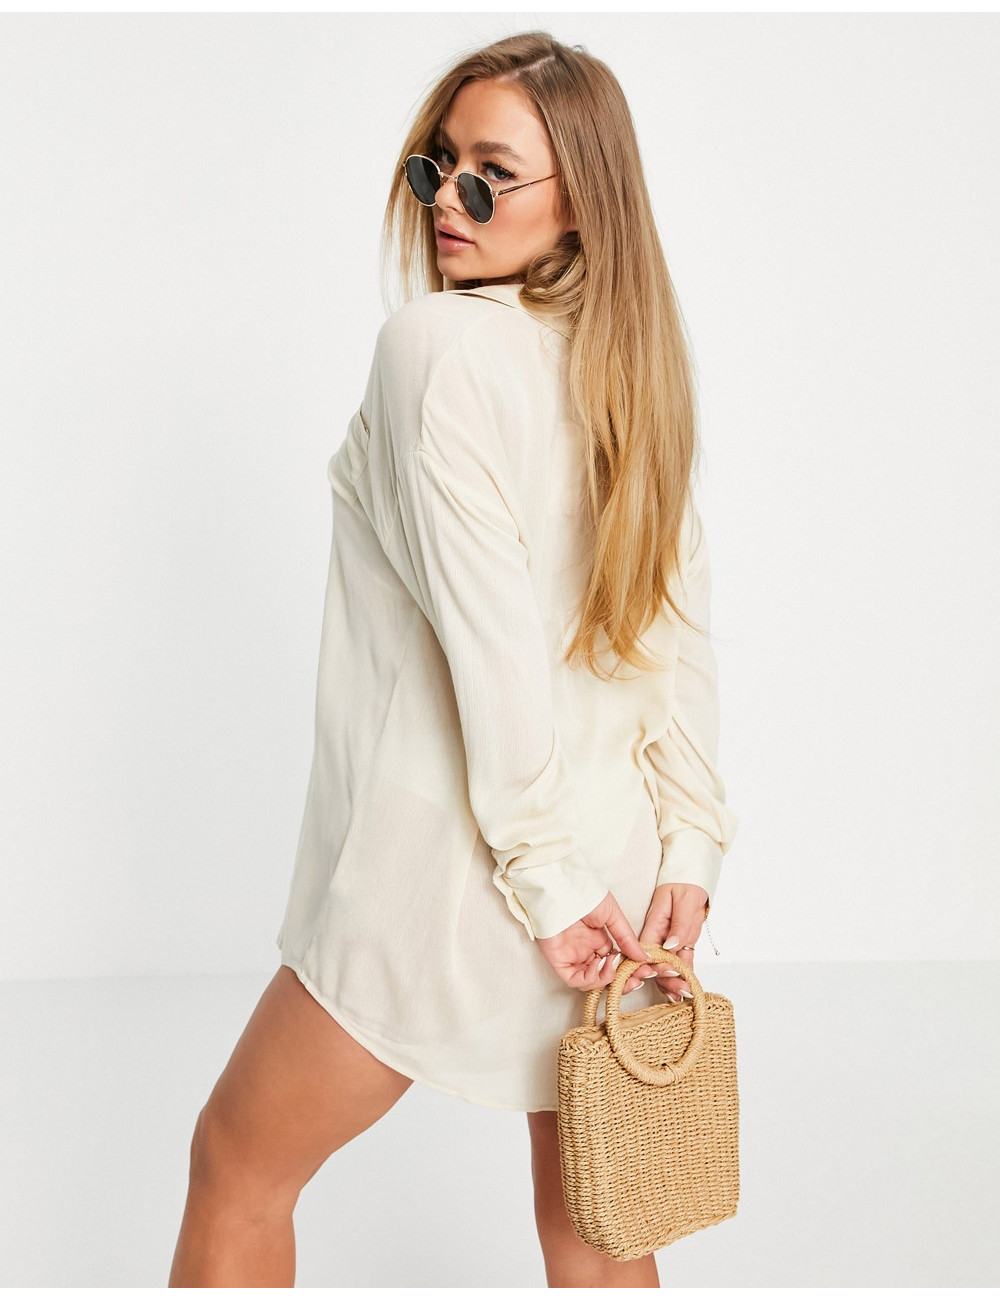 Missguided beach cover up...